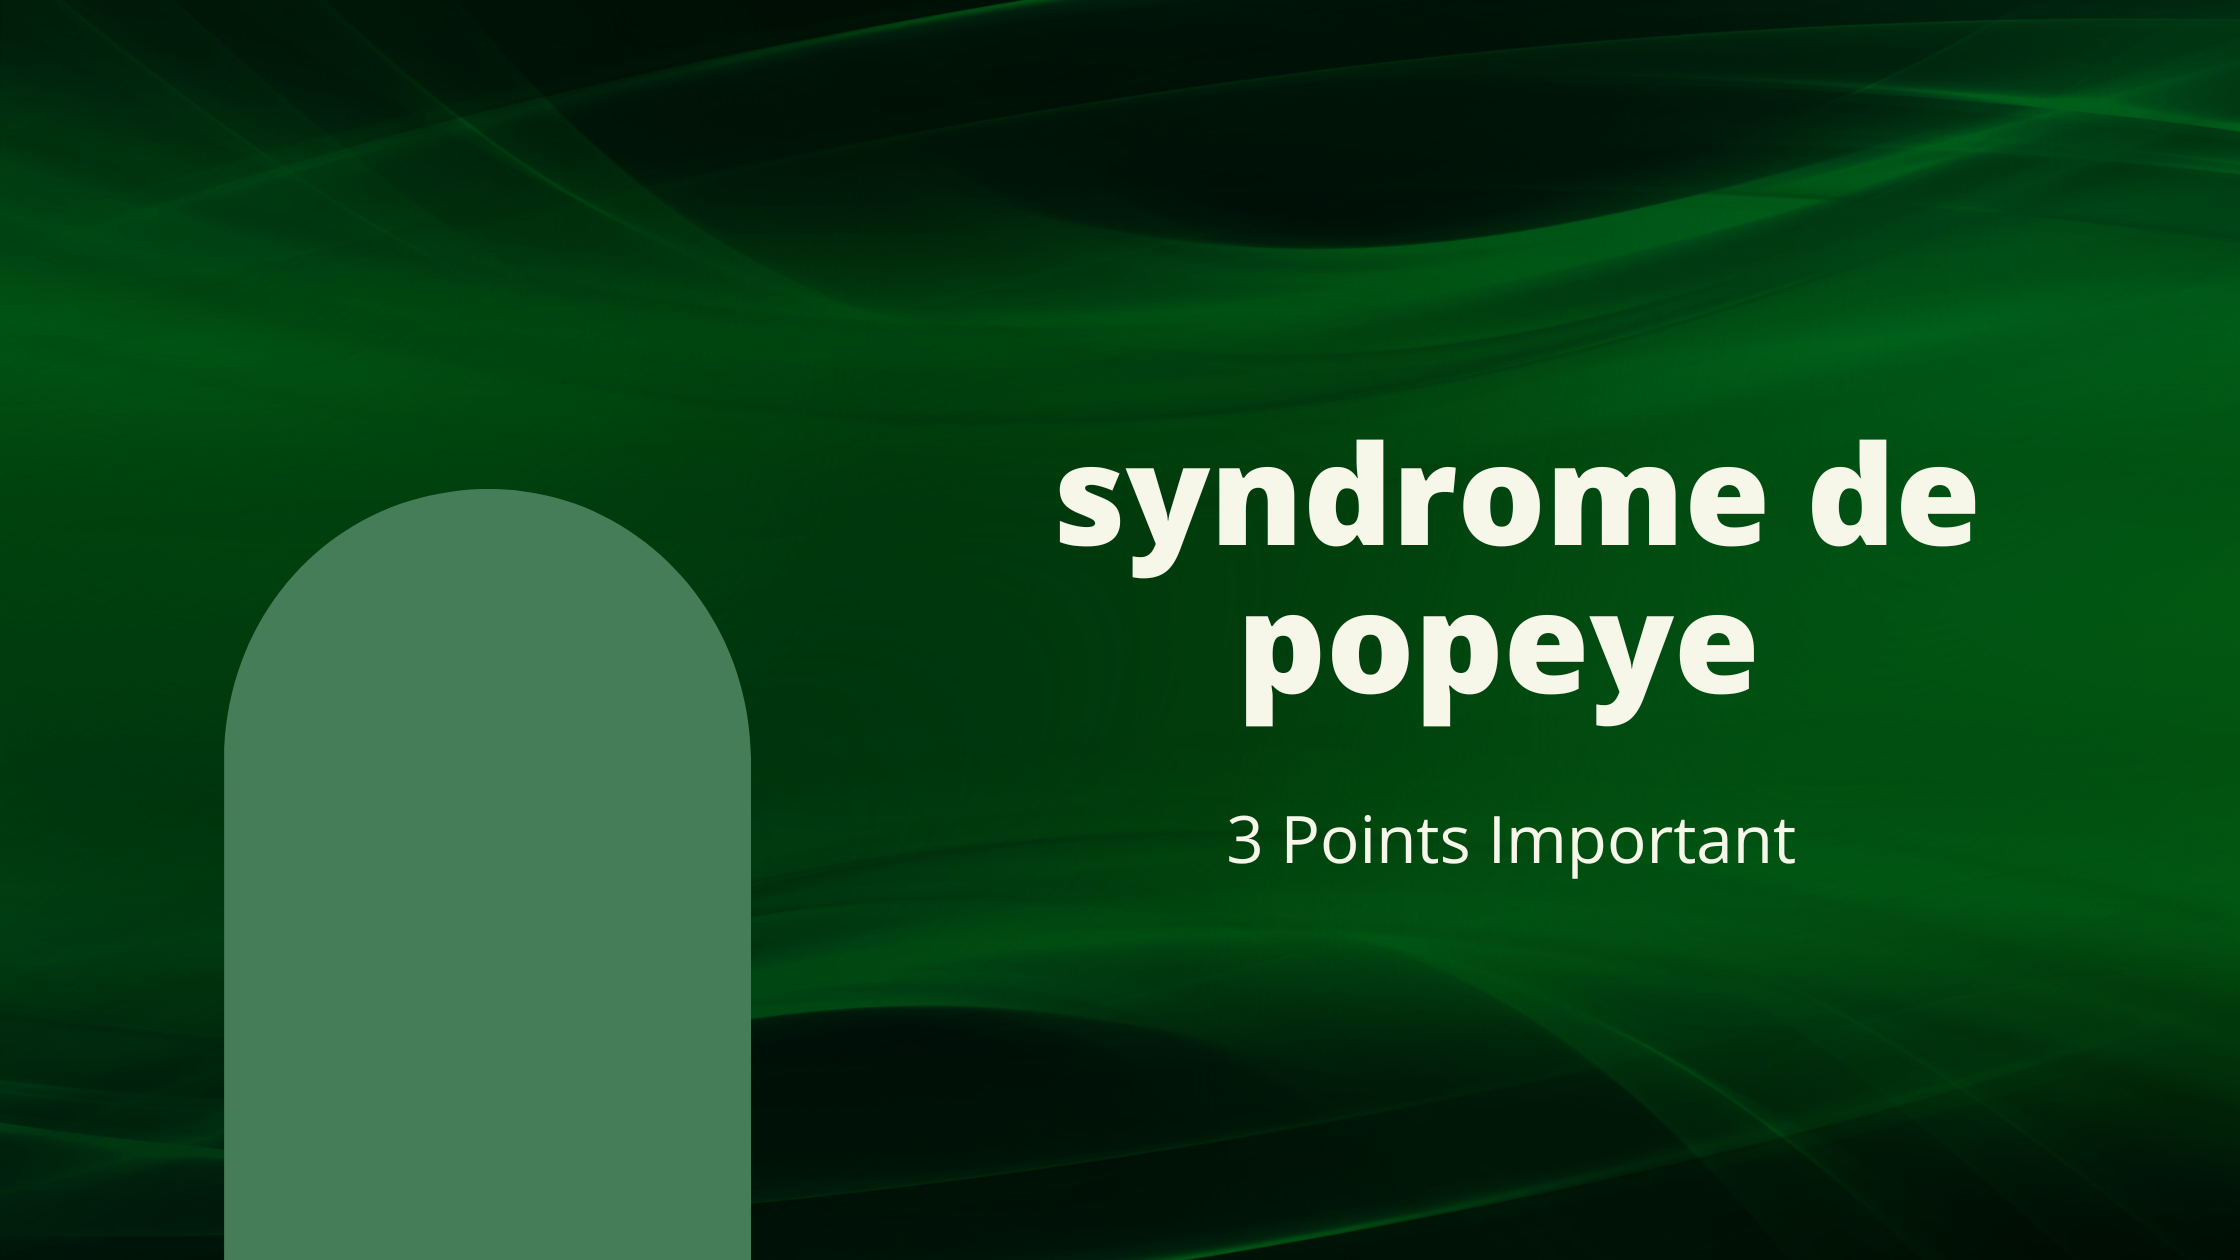 syndrome de popeye | 3 Points Important